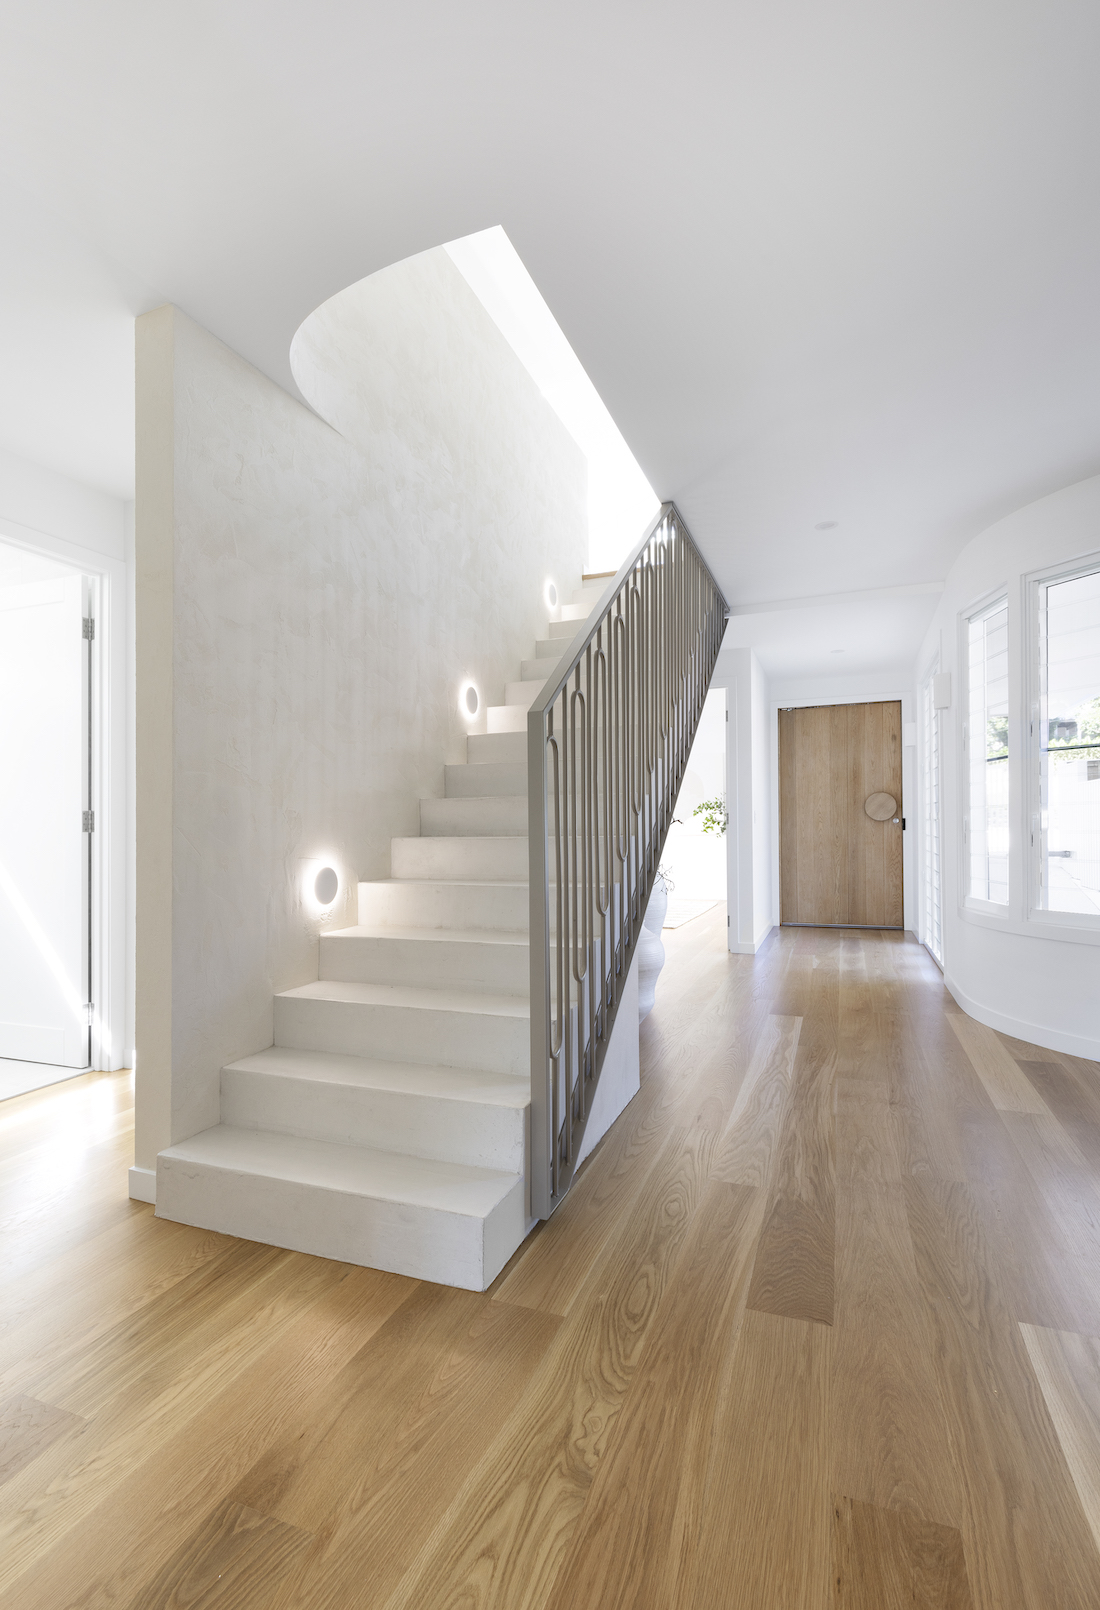 Ornate metal staircase balustrade in home with American oak flooring